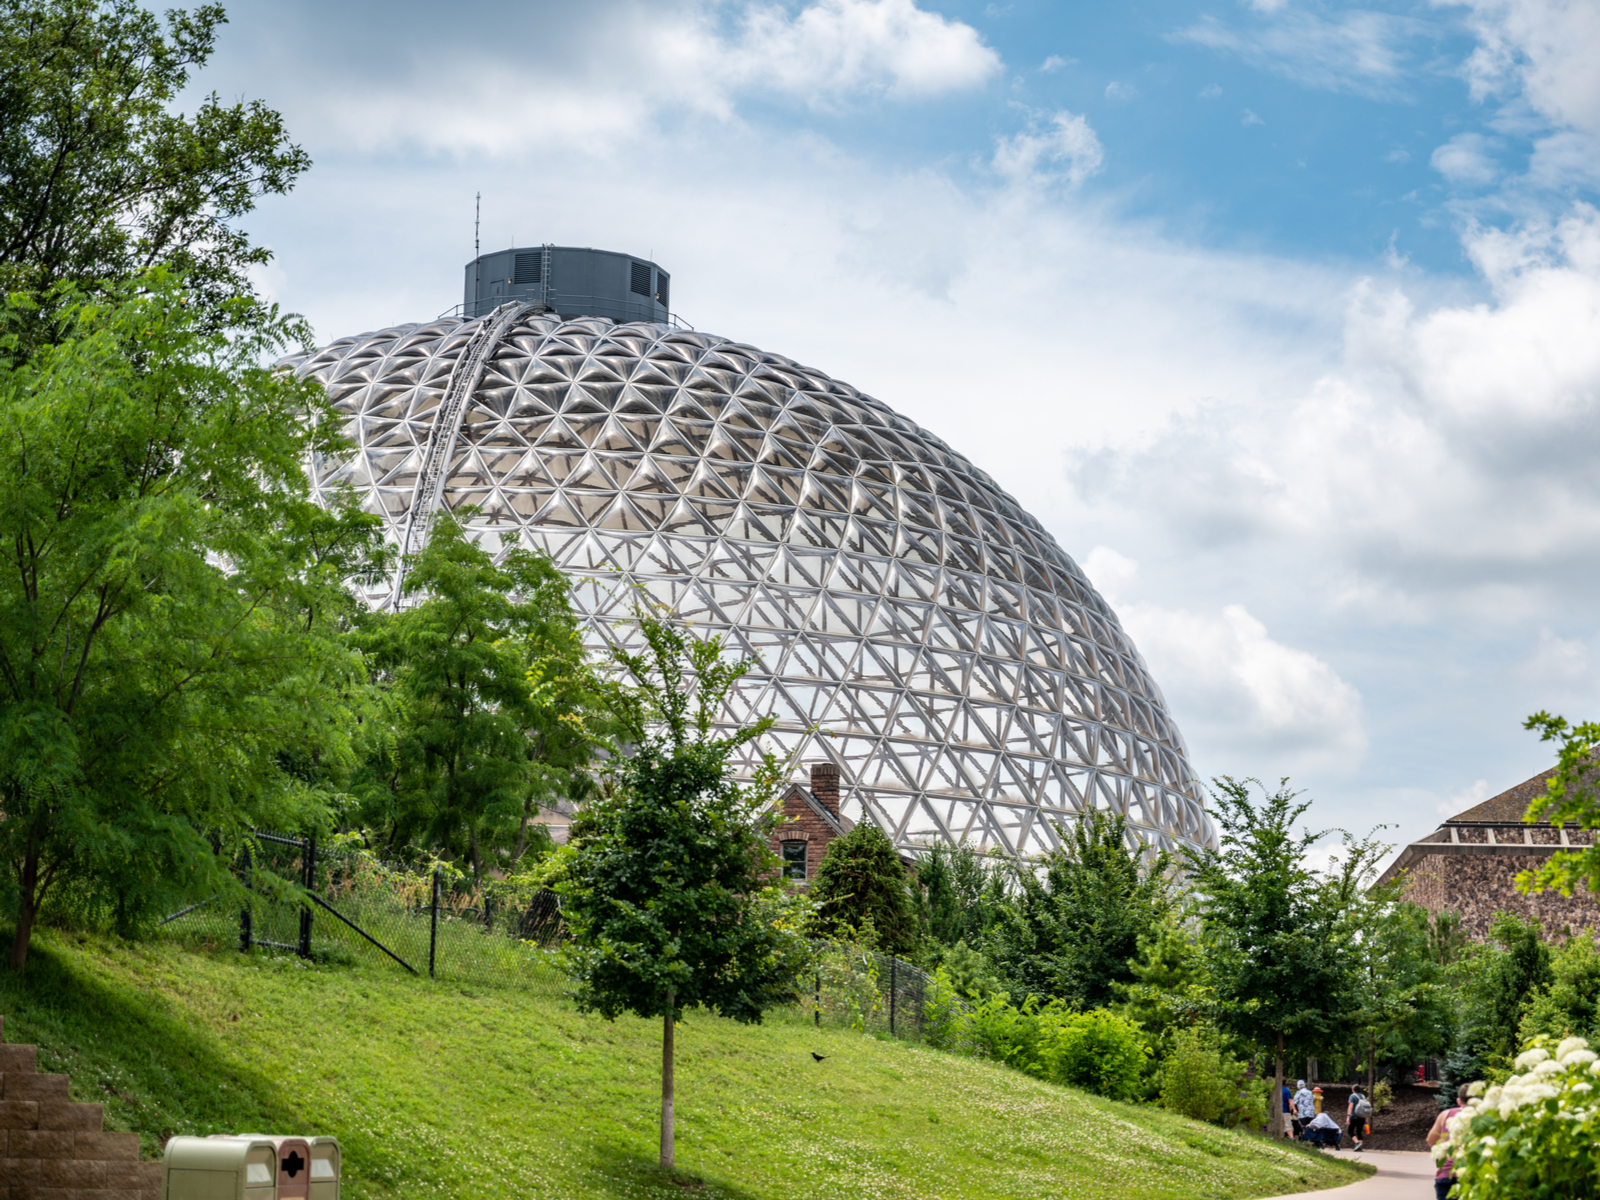 Photo of the Desert Dome at the Henry Doorly Zoo in Omaha, one of the best zoos in the world